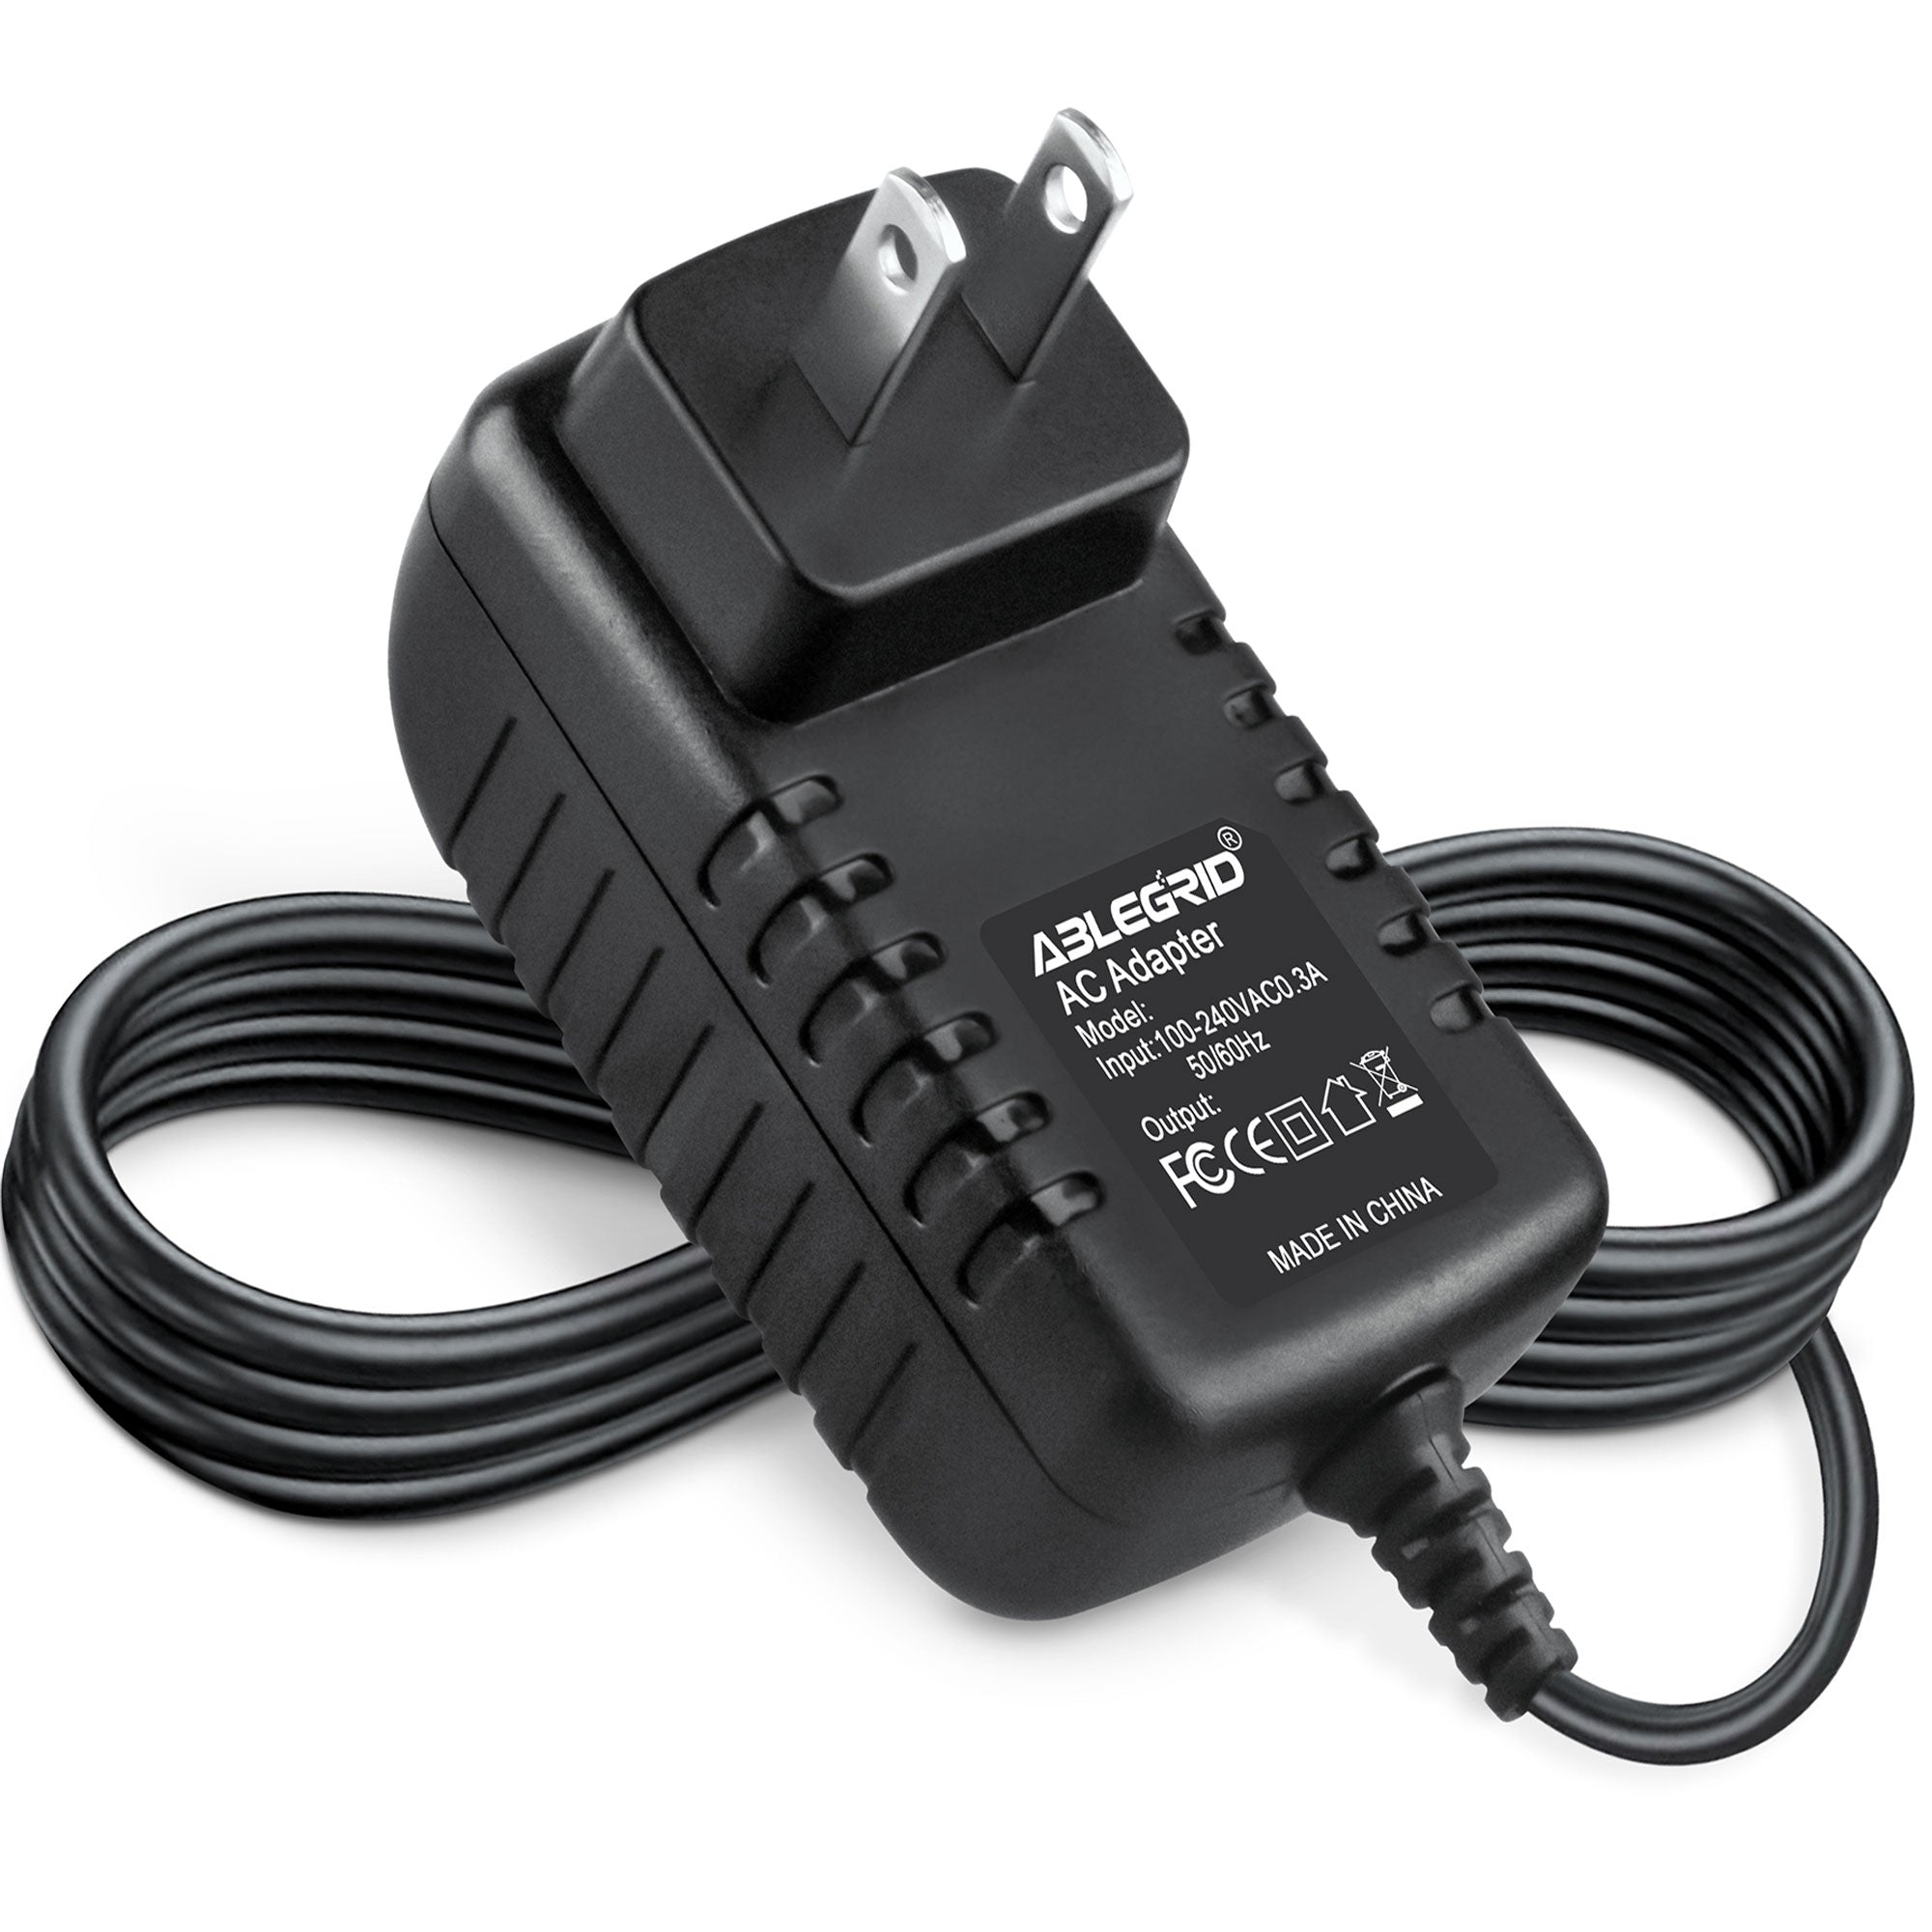 AbleGrid AC / DC Adapter for Fluke Type: FW75550/12 Power Supply Cord Cable PS Wall Home Battery Charger Input: 100V - 120V AC - 240 VAC 50/60Hz Worldwide Voltage Use Mains PSU